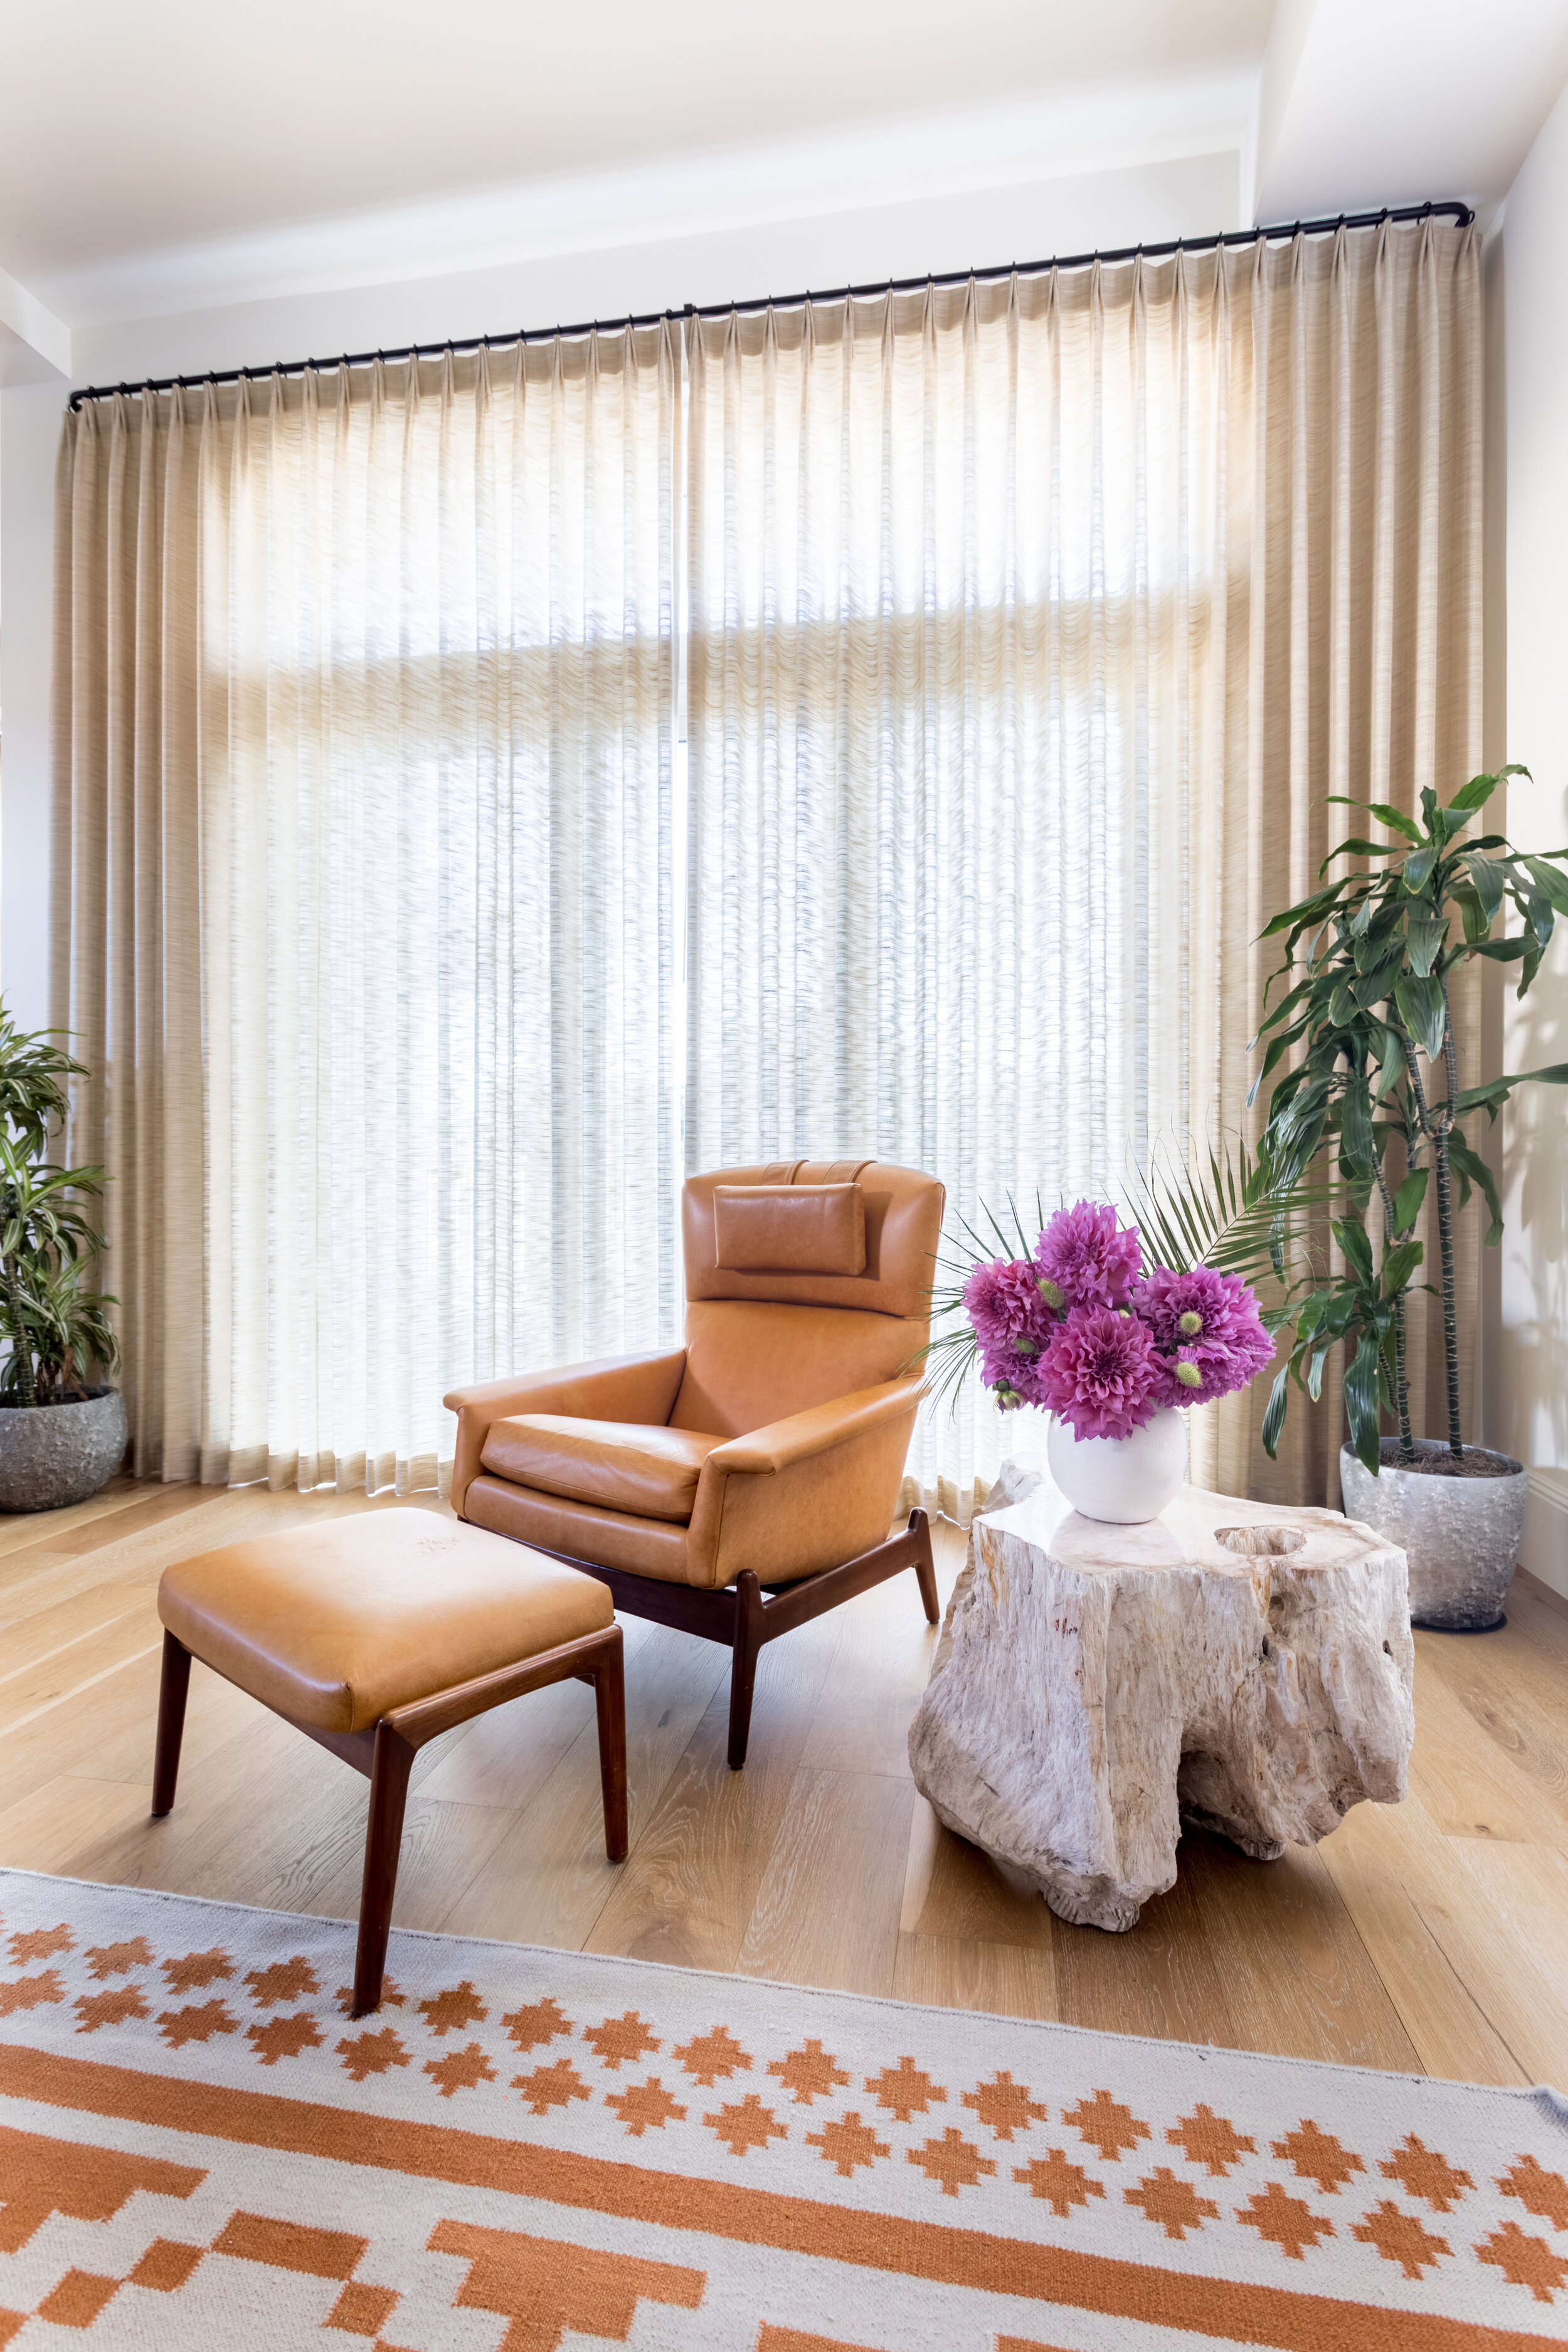 Orange leather chair and ottoman with brown wooden legs next to wooden side table with white vase and purple flowers. Green plants and beige drapery in background.